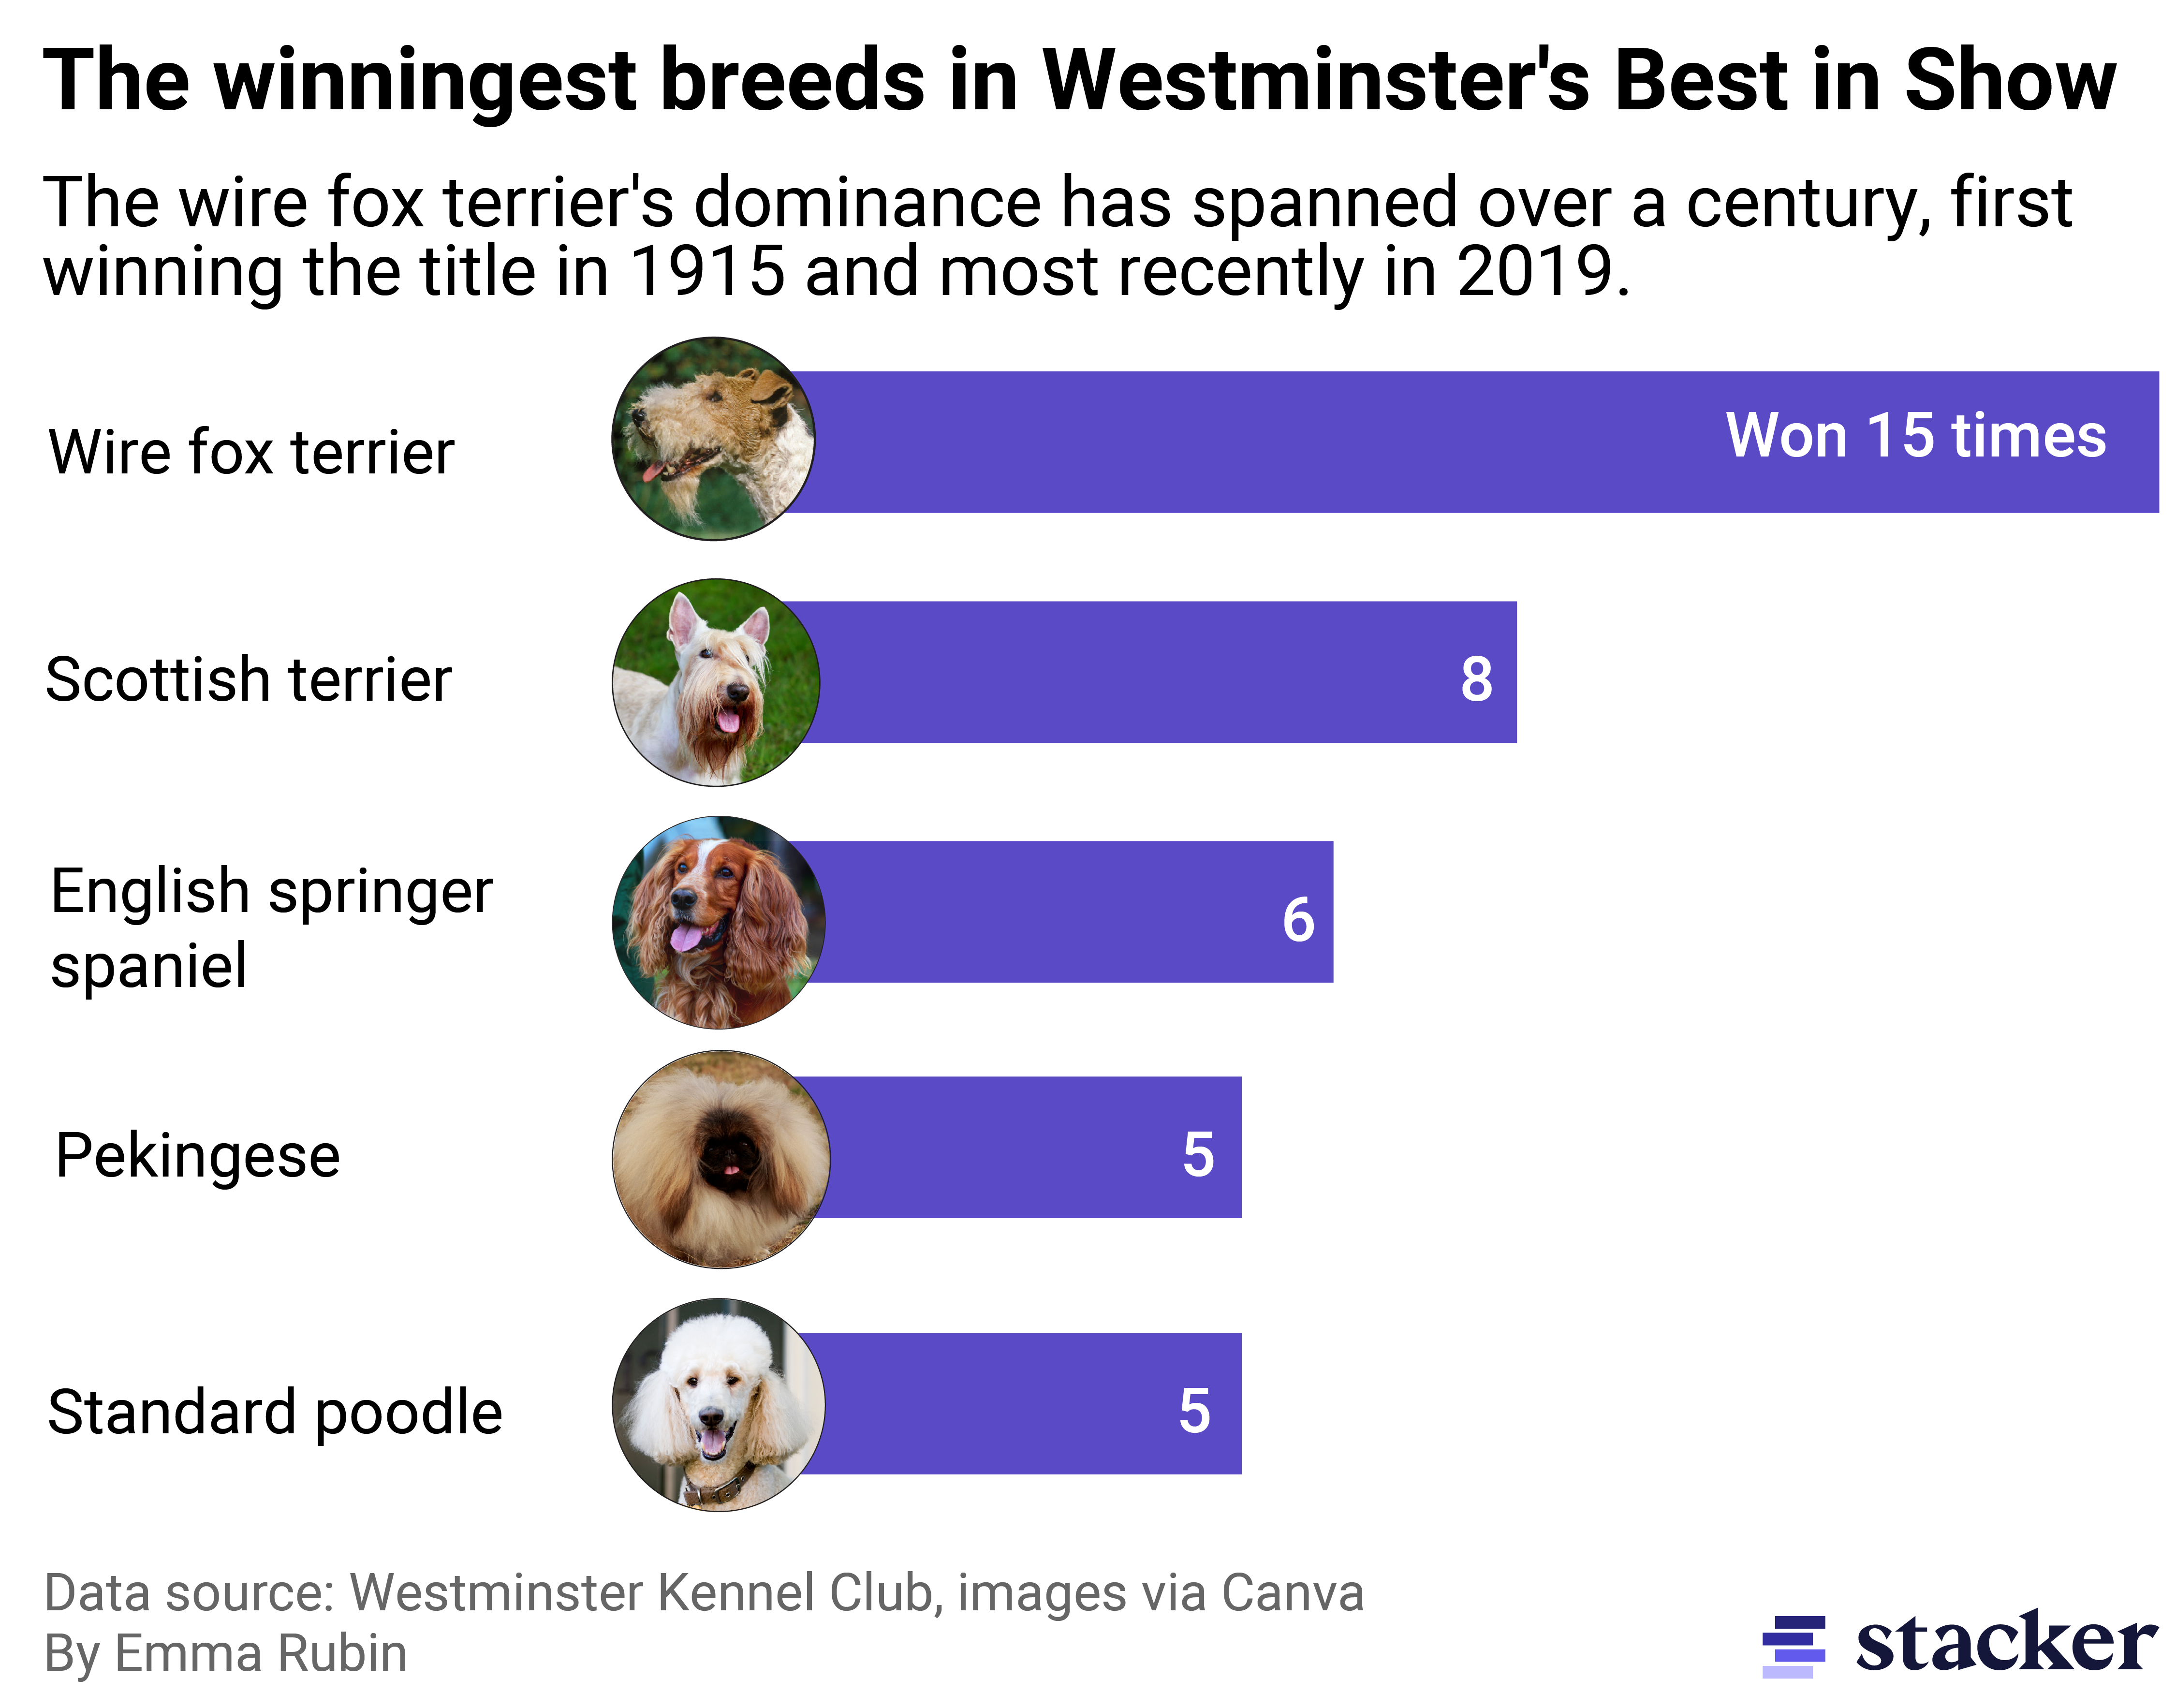 Bar chart showing the winningest breeds at the Westminster Best in Show competition. A wire fox terrrier has won 15 times, followed by a Scottish terrier with 8 times.